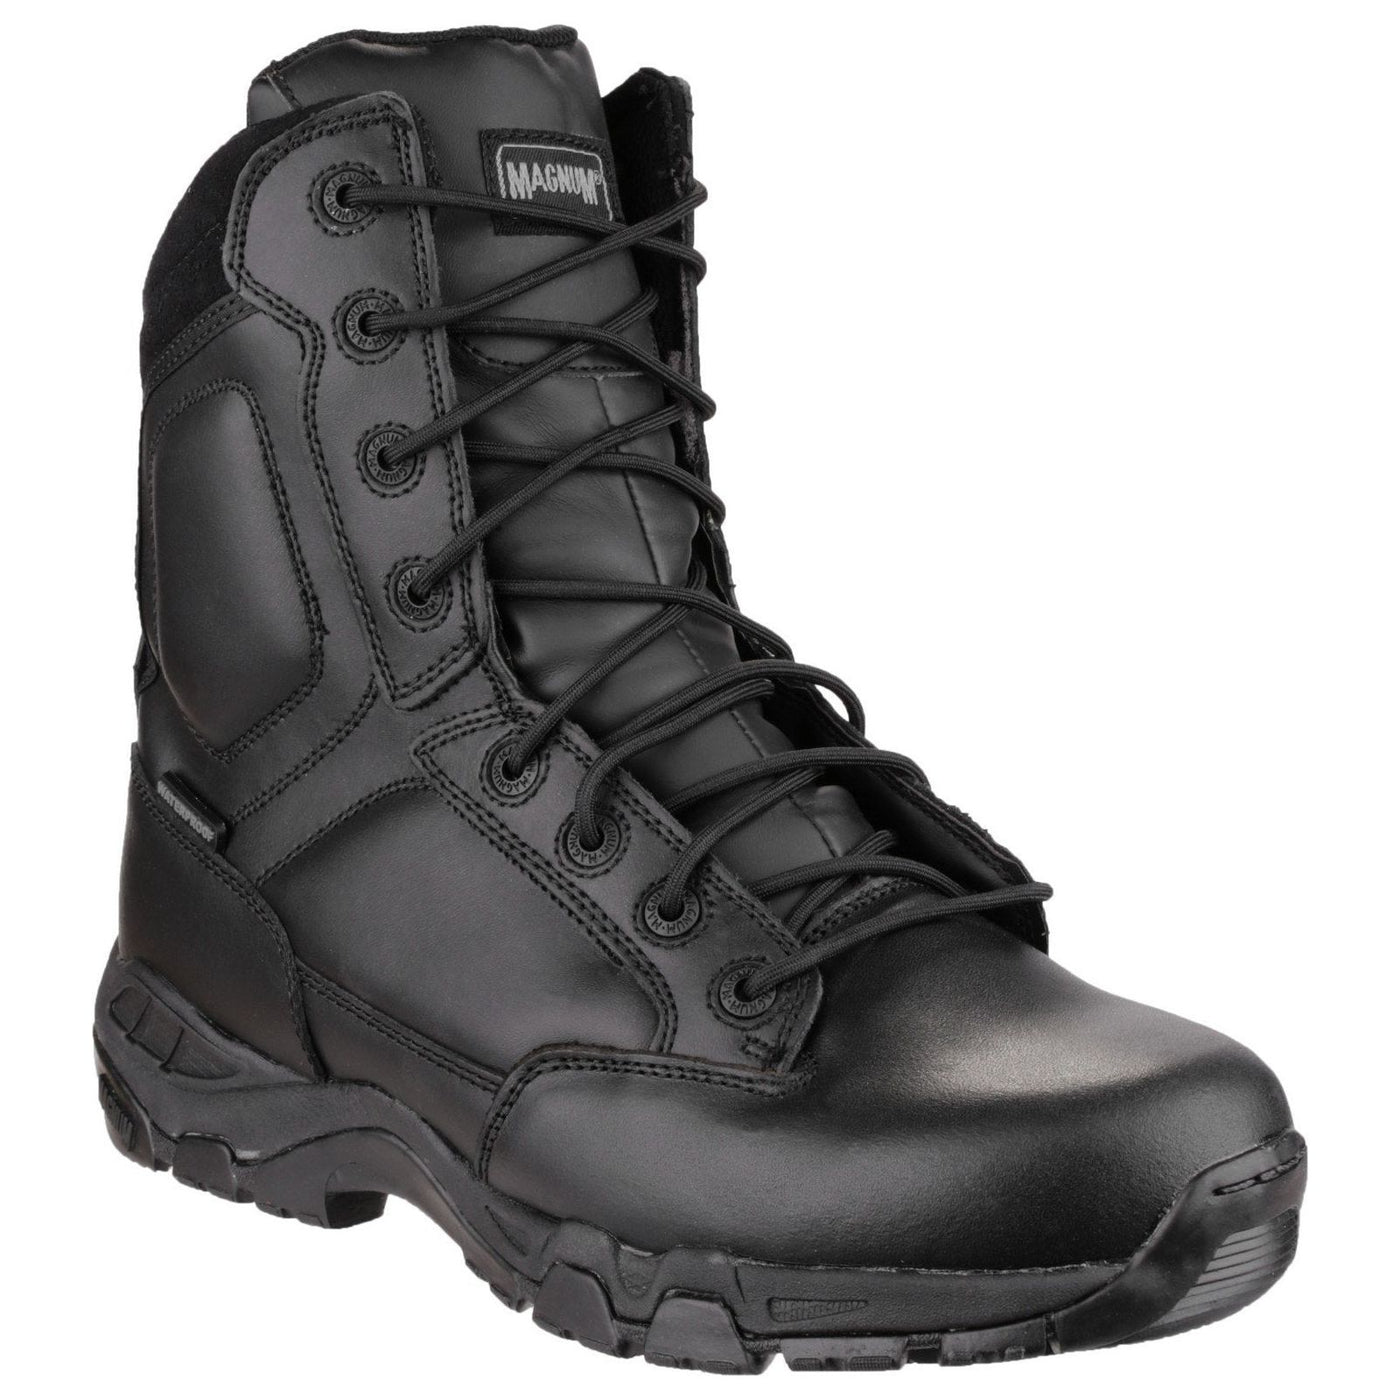 Magnum Viper Pro 8.0 Waterproof Safety Boots Womens